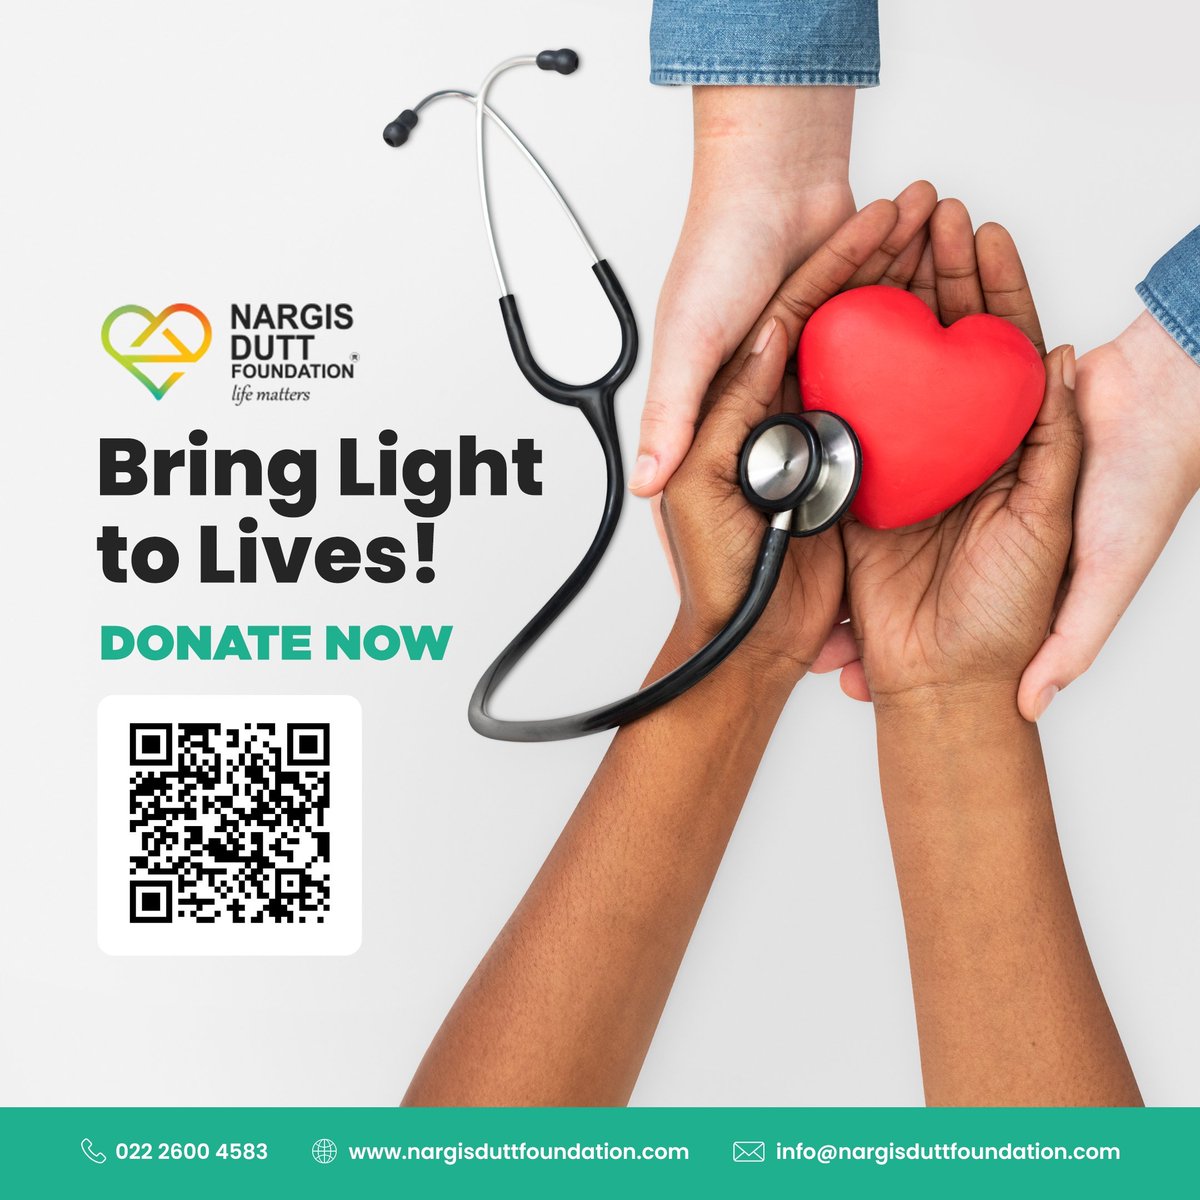 Contribute to a cause that brings light and hope into the lives of others. It emphasizes the transformative power of generosity and urges action to make a positive impact on those in need. Donate Now, Link in Bio! #NargisDuttFoundation #TheresMoreToLife #LifeMatters